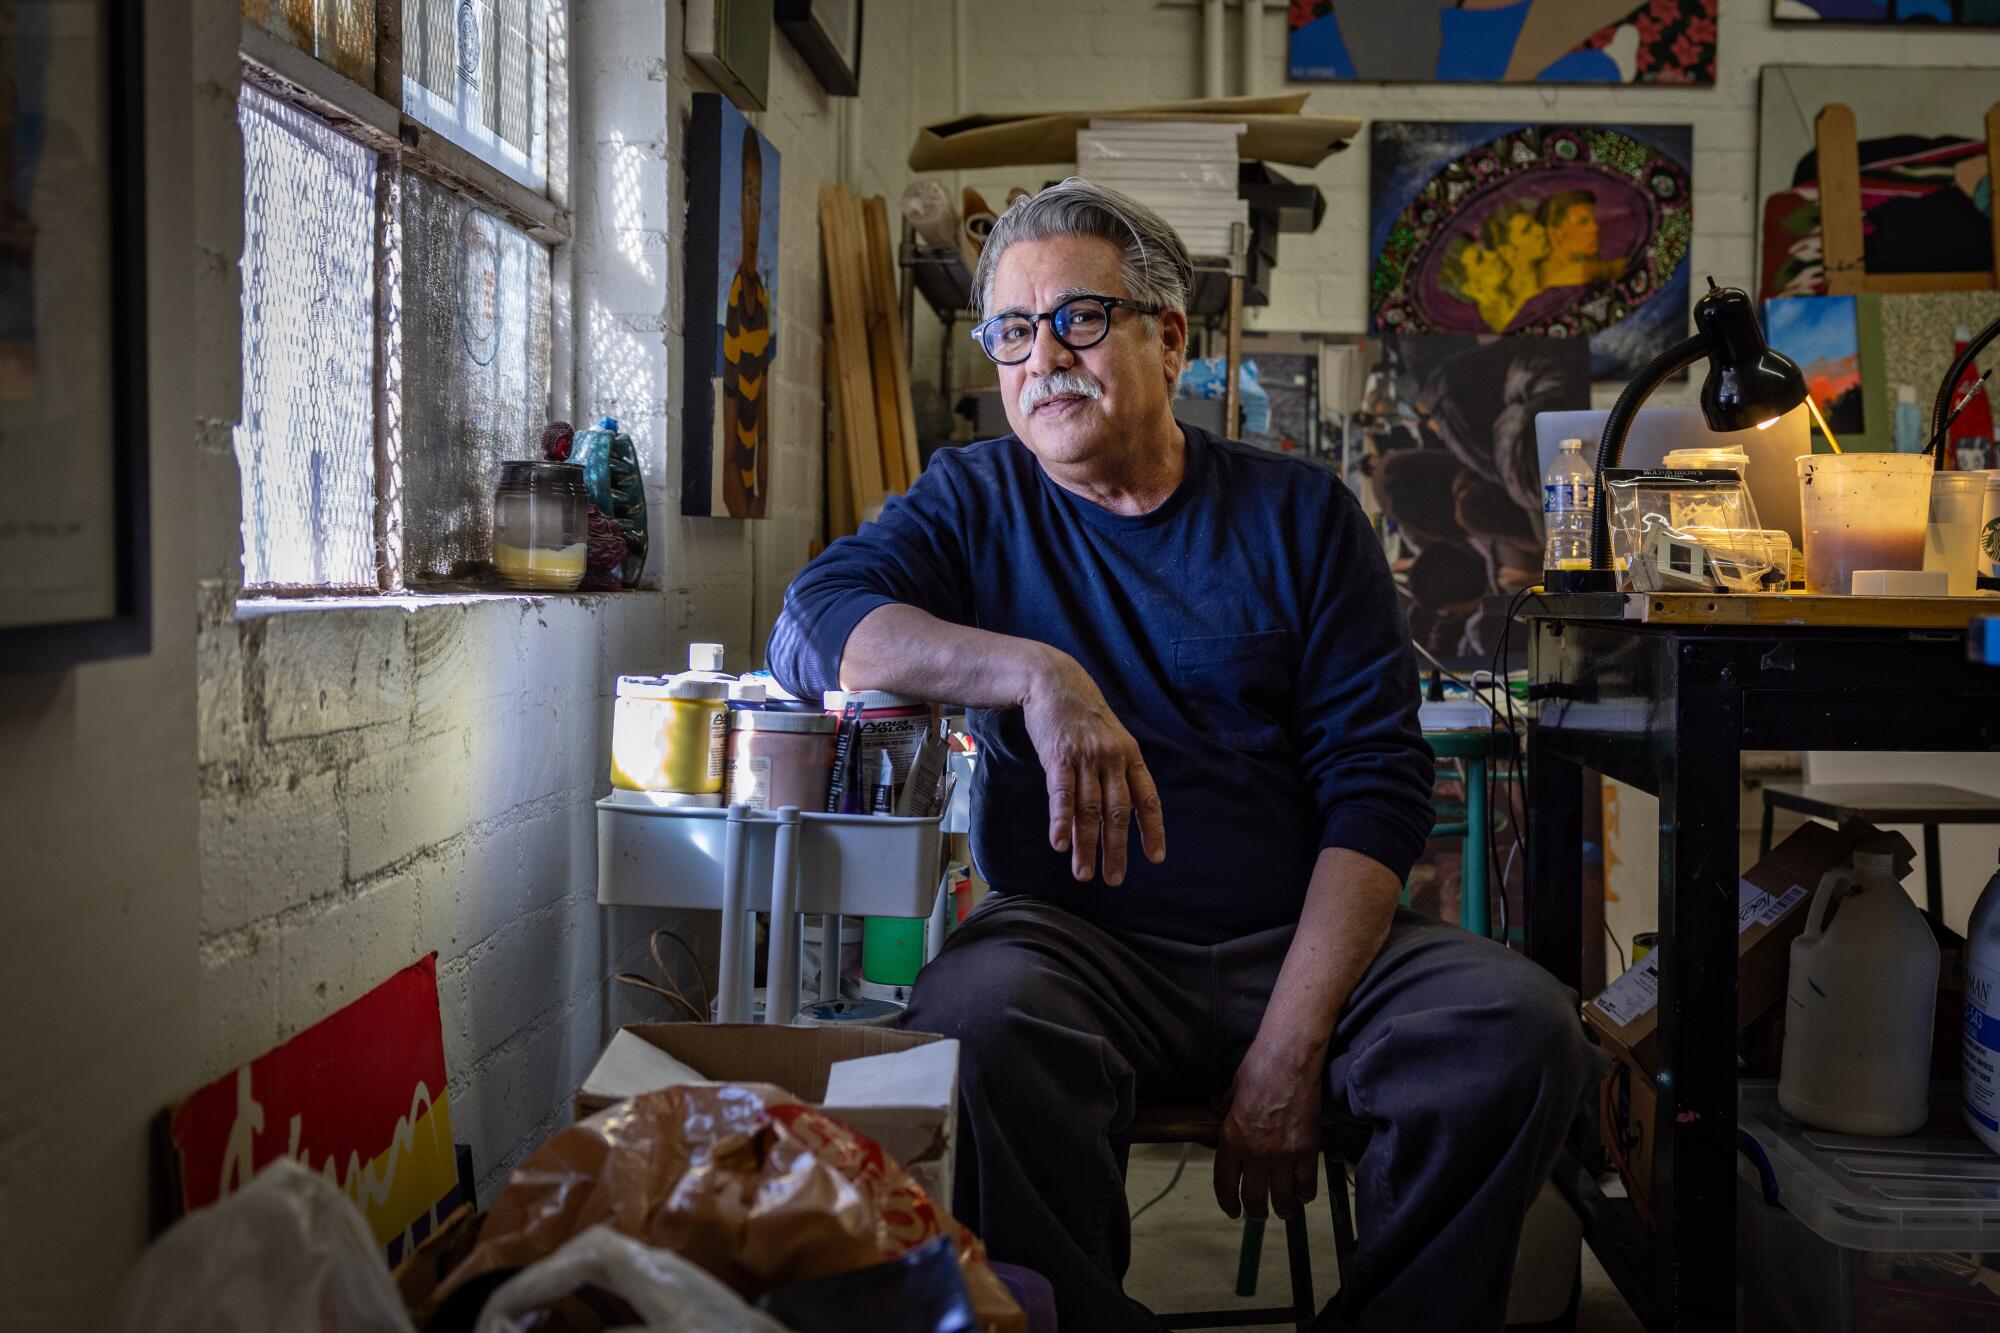 Joey Terrill, a Chicano man in his late 60s, sits amid containers of paint and colorful collages in a cluttered studio.